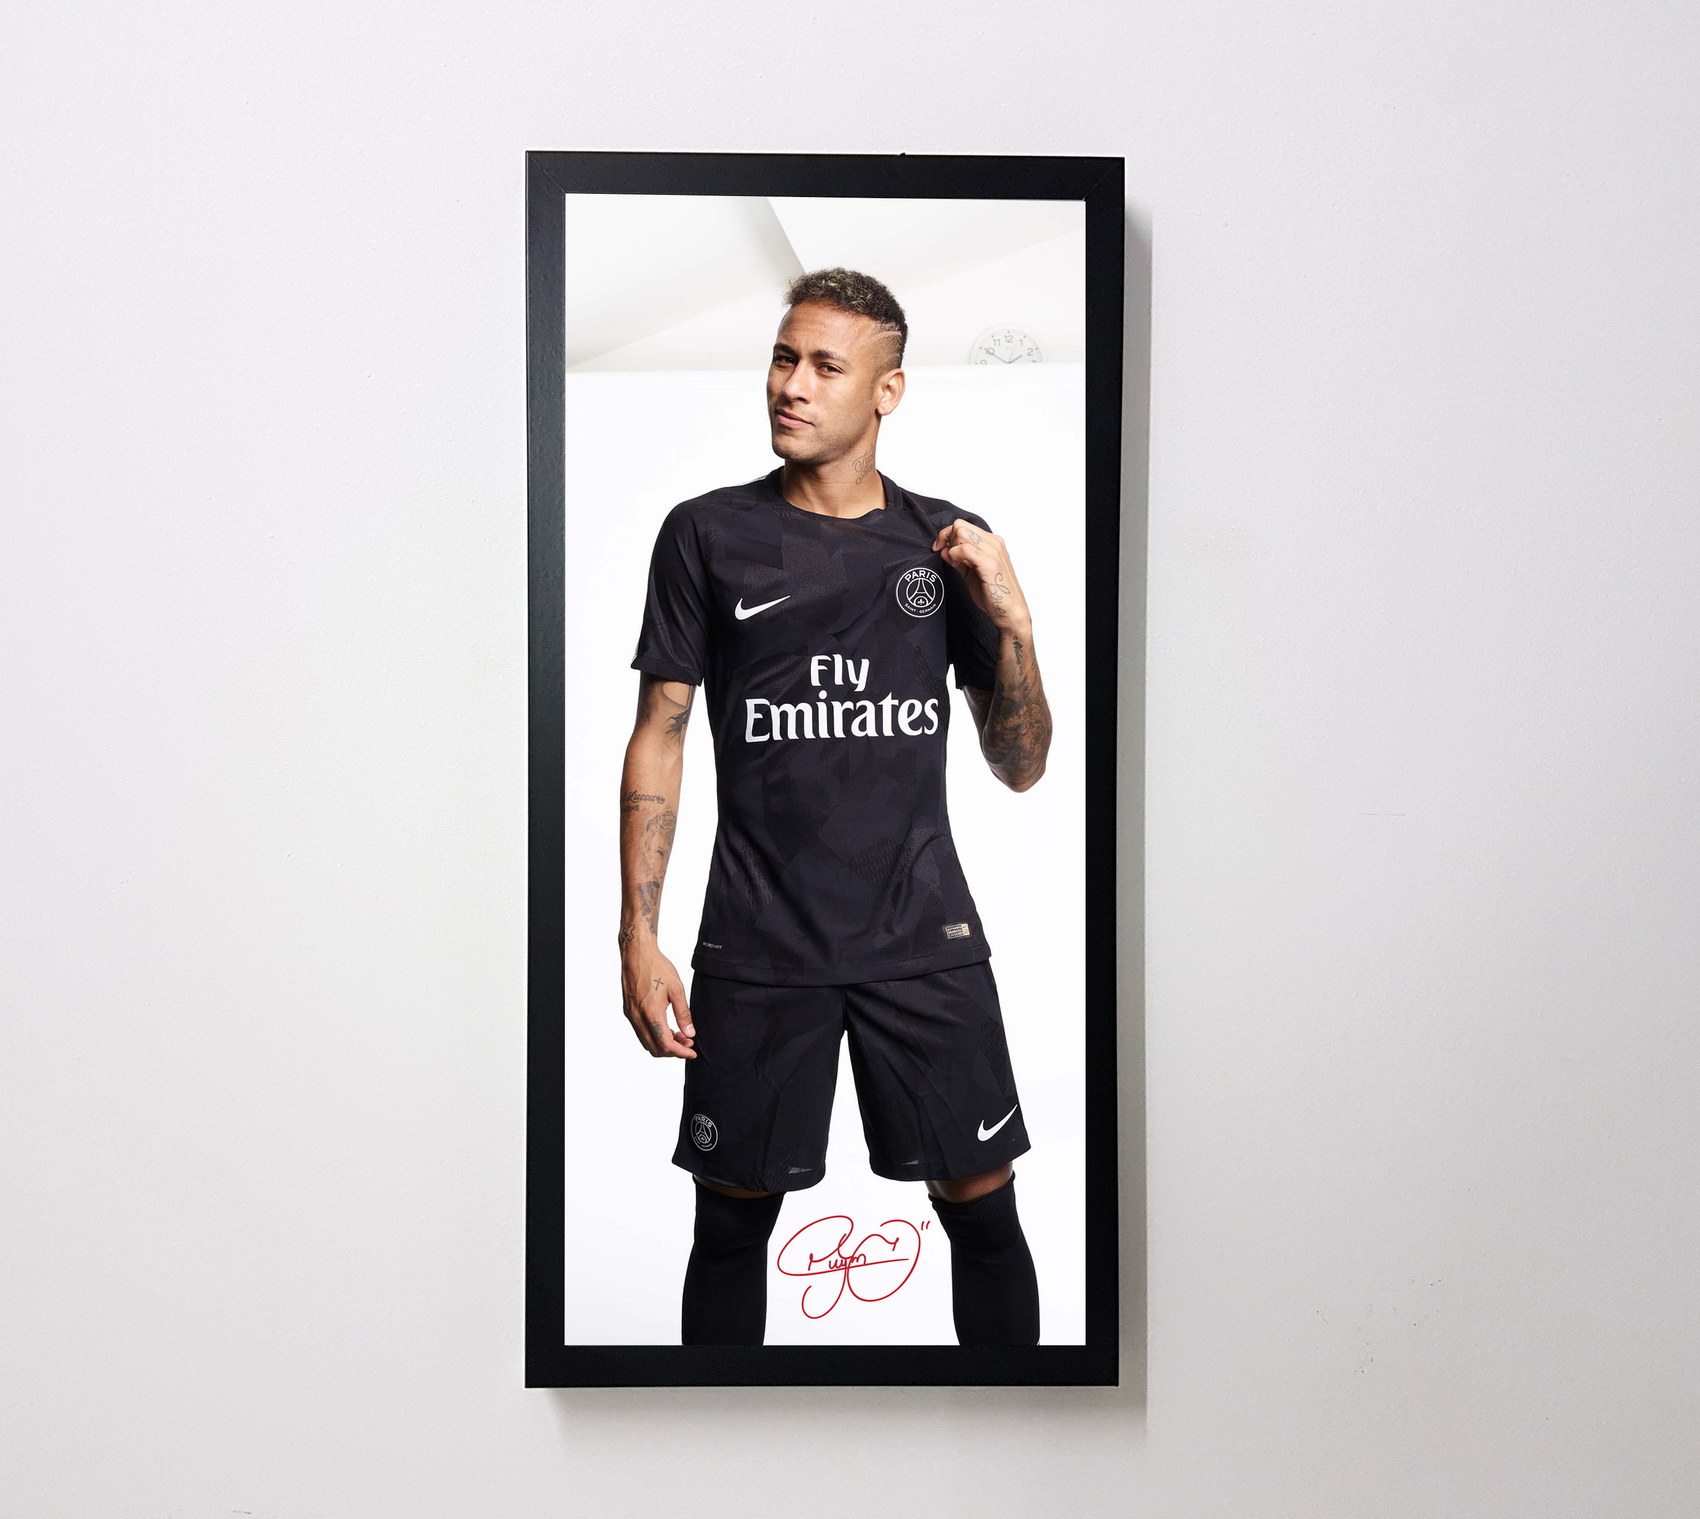 Buy Boomah Accessories Neymar Psg Autographed Poster With Frame Online Shop Home Garden On Carrefour Uae